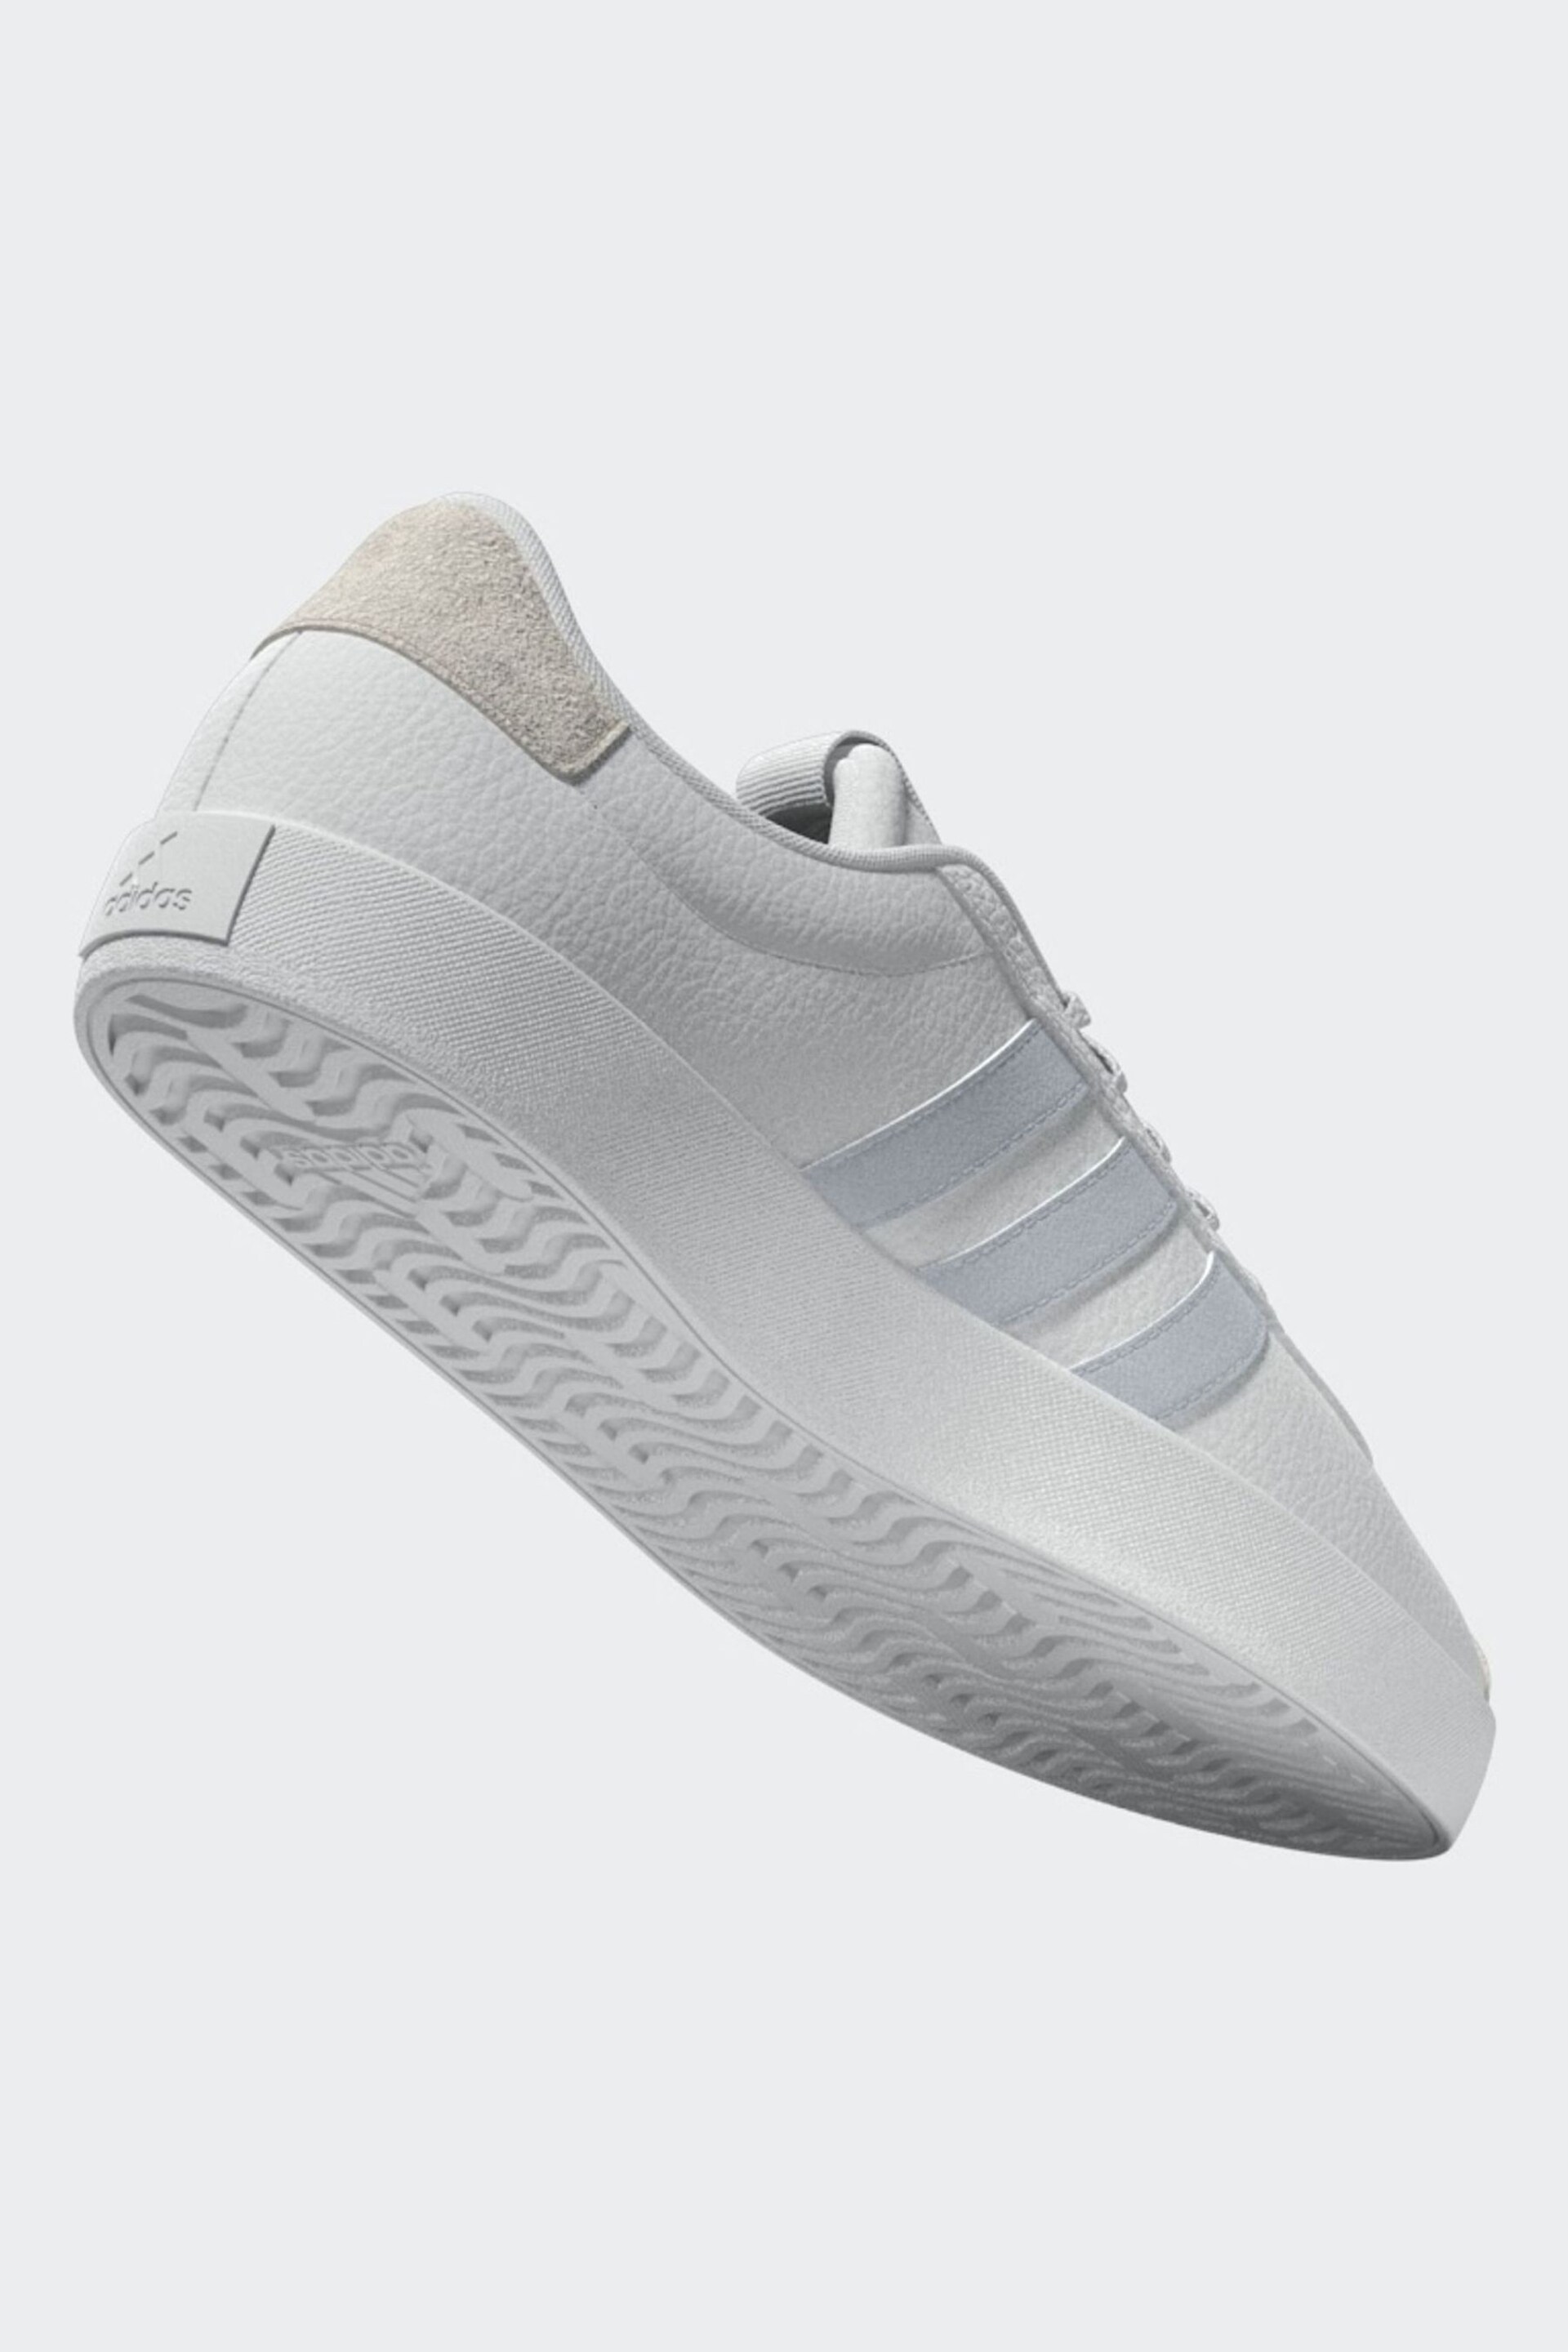 adidas White VL Court 3.0 Trainers - Image 3 of 12